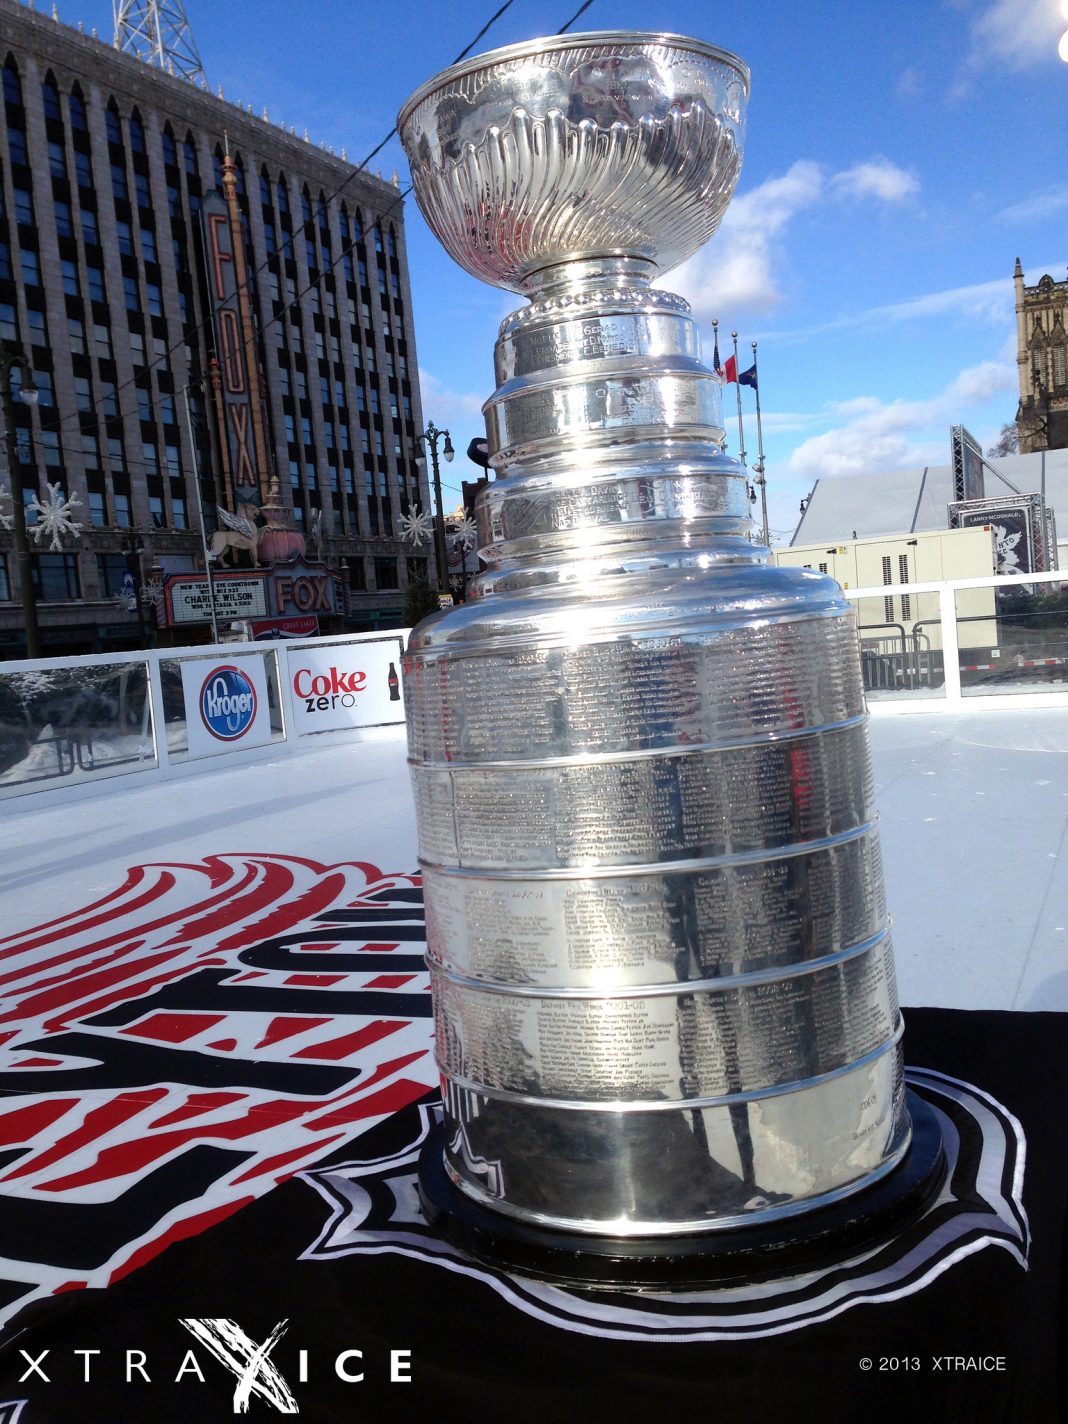 stanley cup photo by Xtraice in Detroit